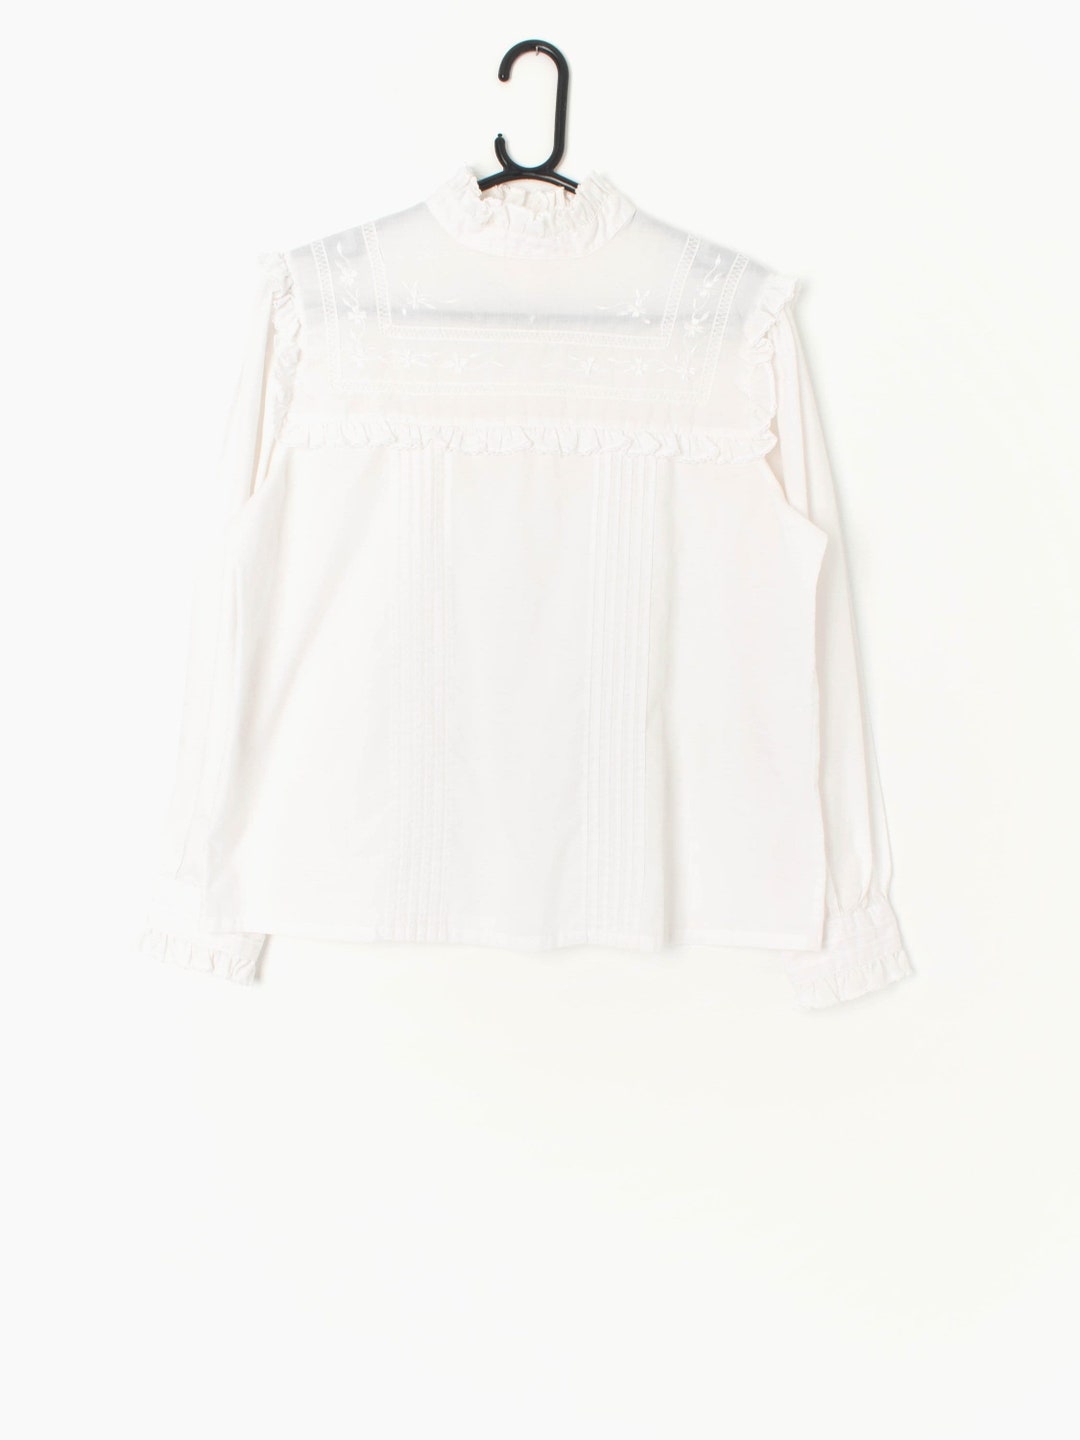 Vintage 70s Blouse White With Frills / Ruffles and Button up Back Large ...